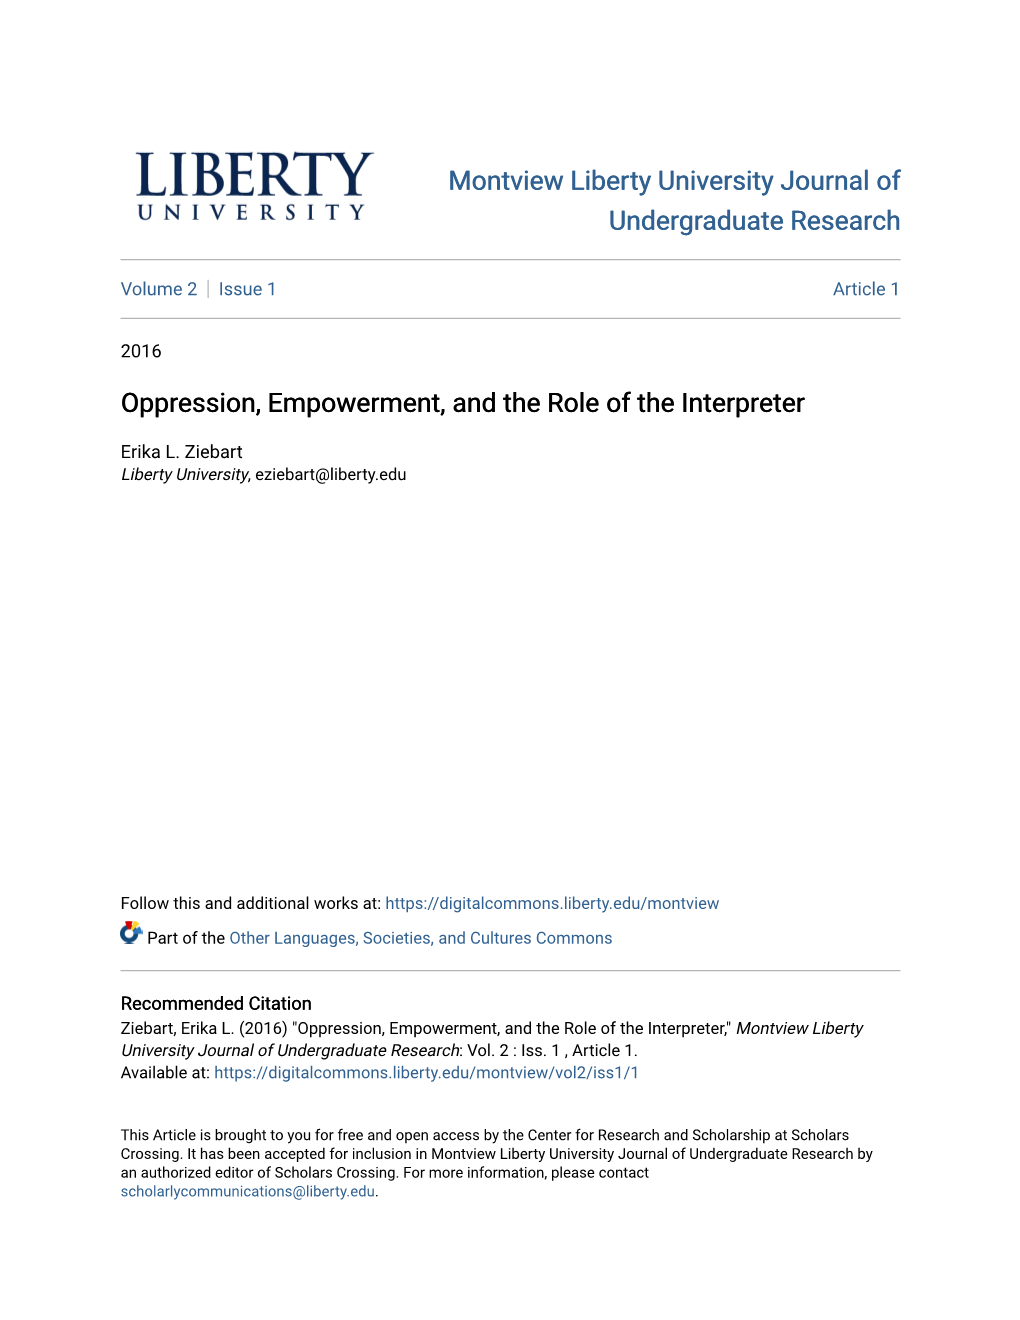 Oppression, Empowerment, and the Role of the Interpreter